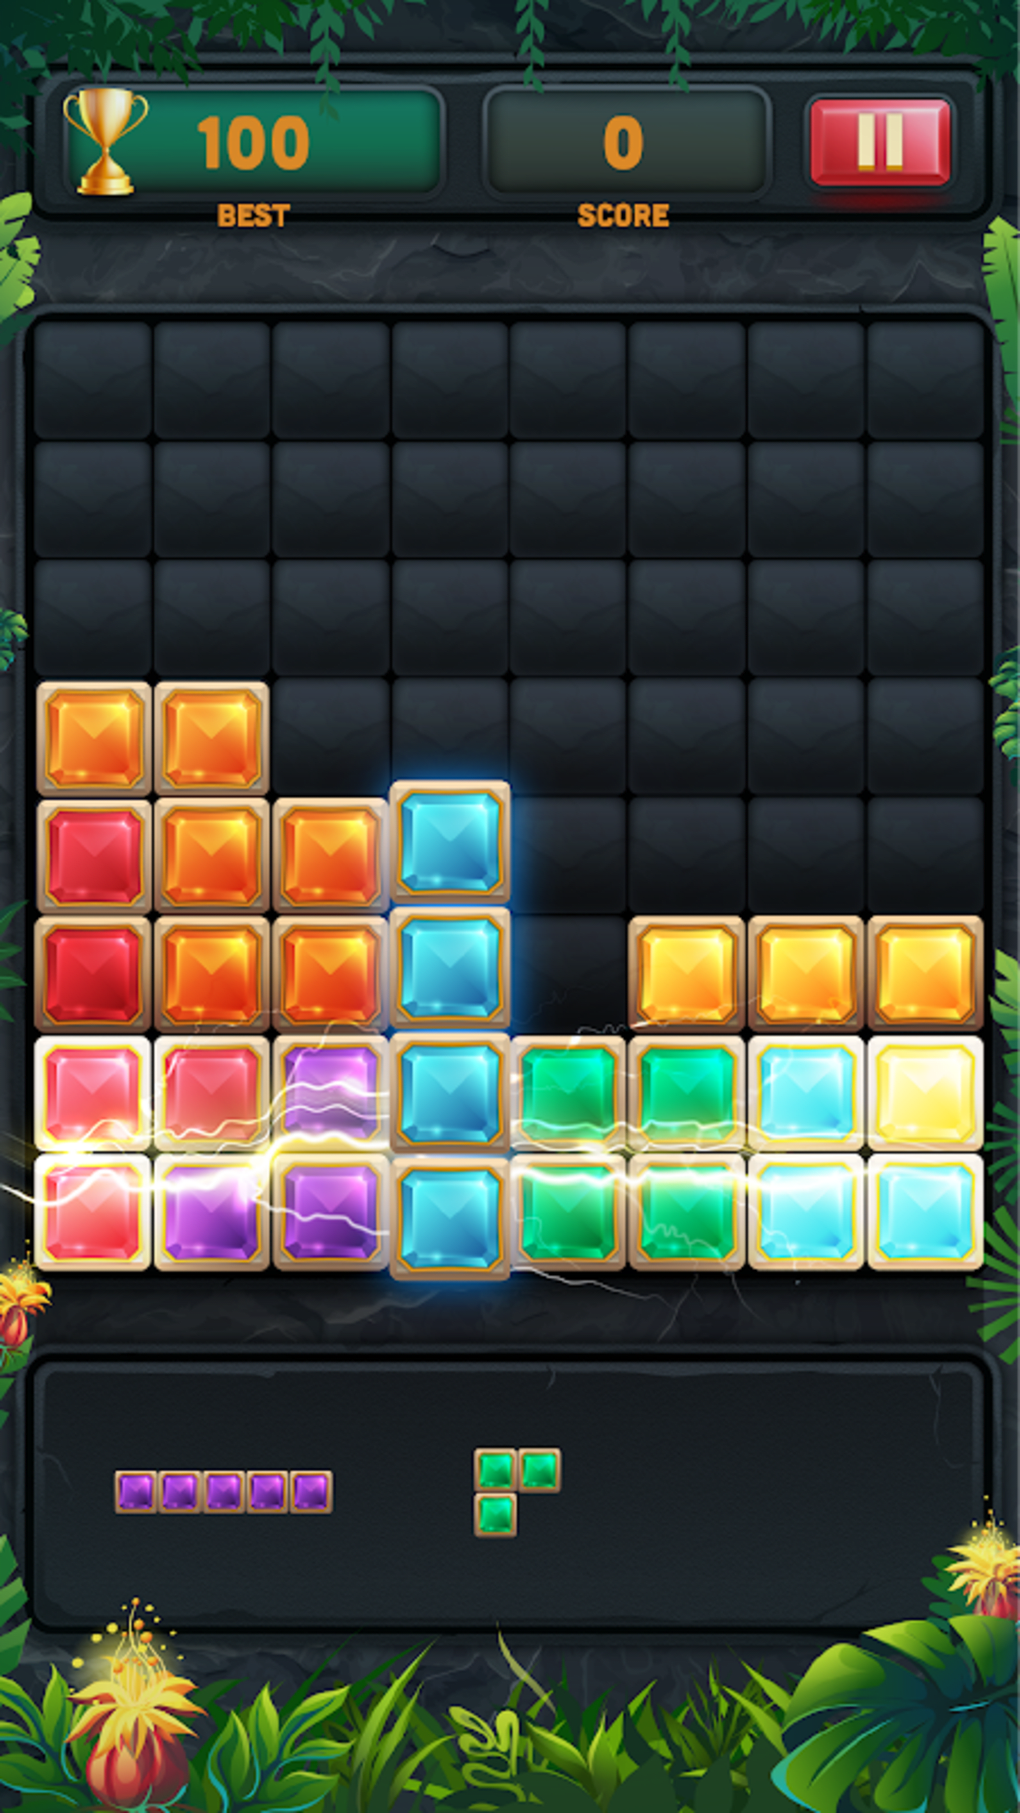 Block Puzzle Classic Game for Android - Download